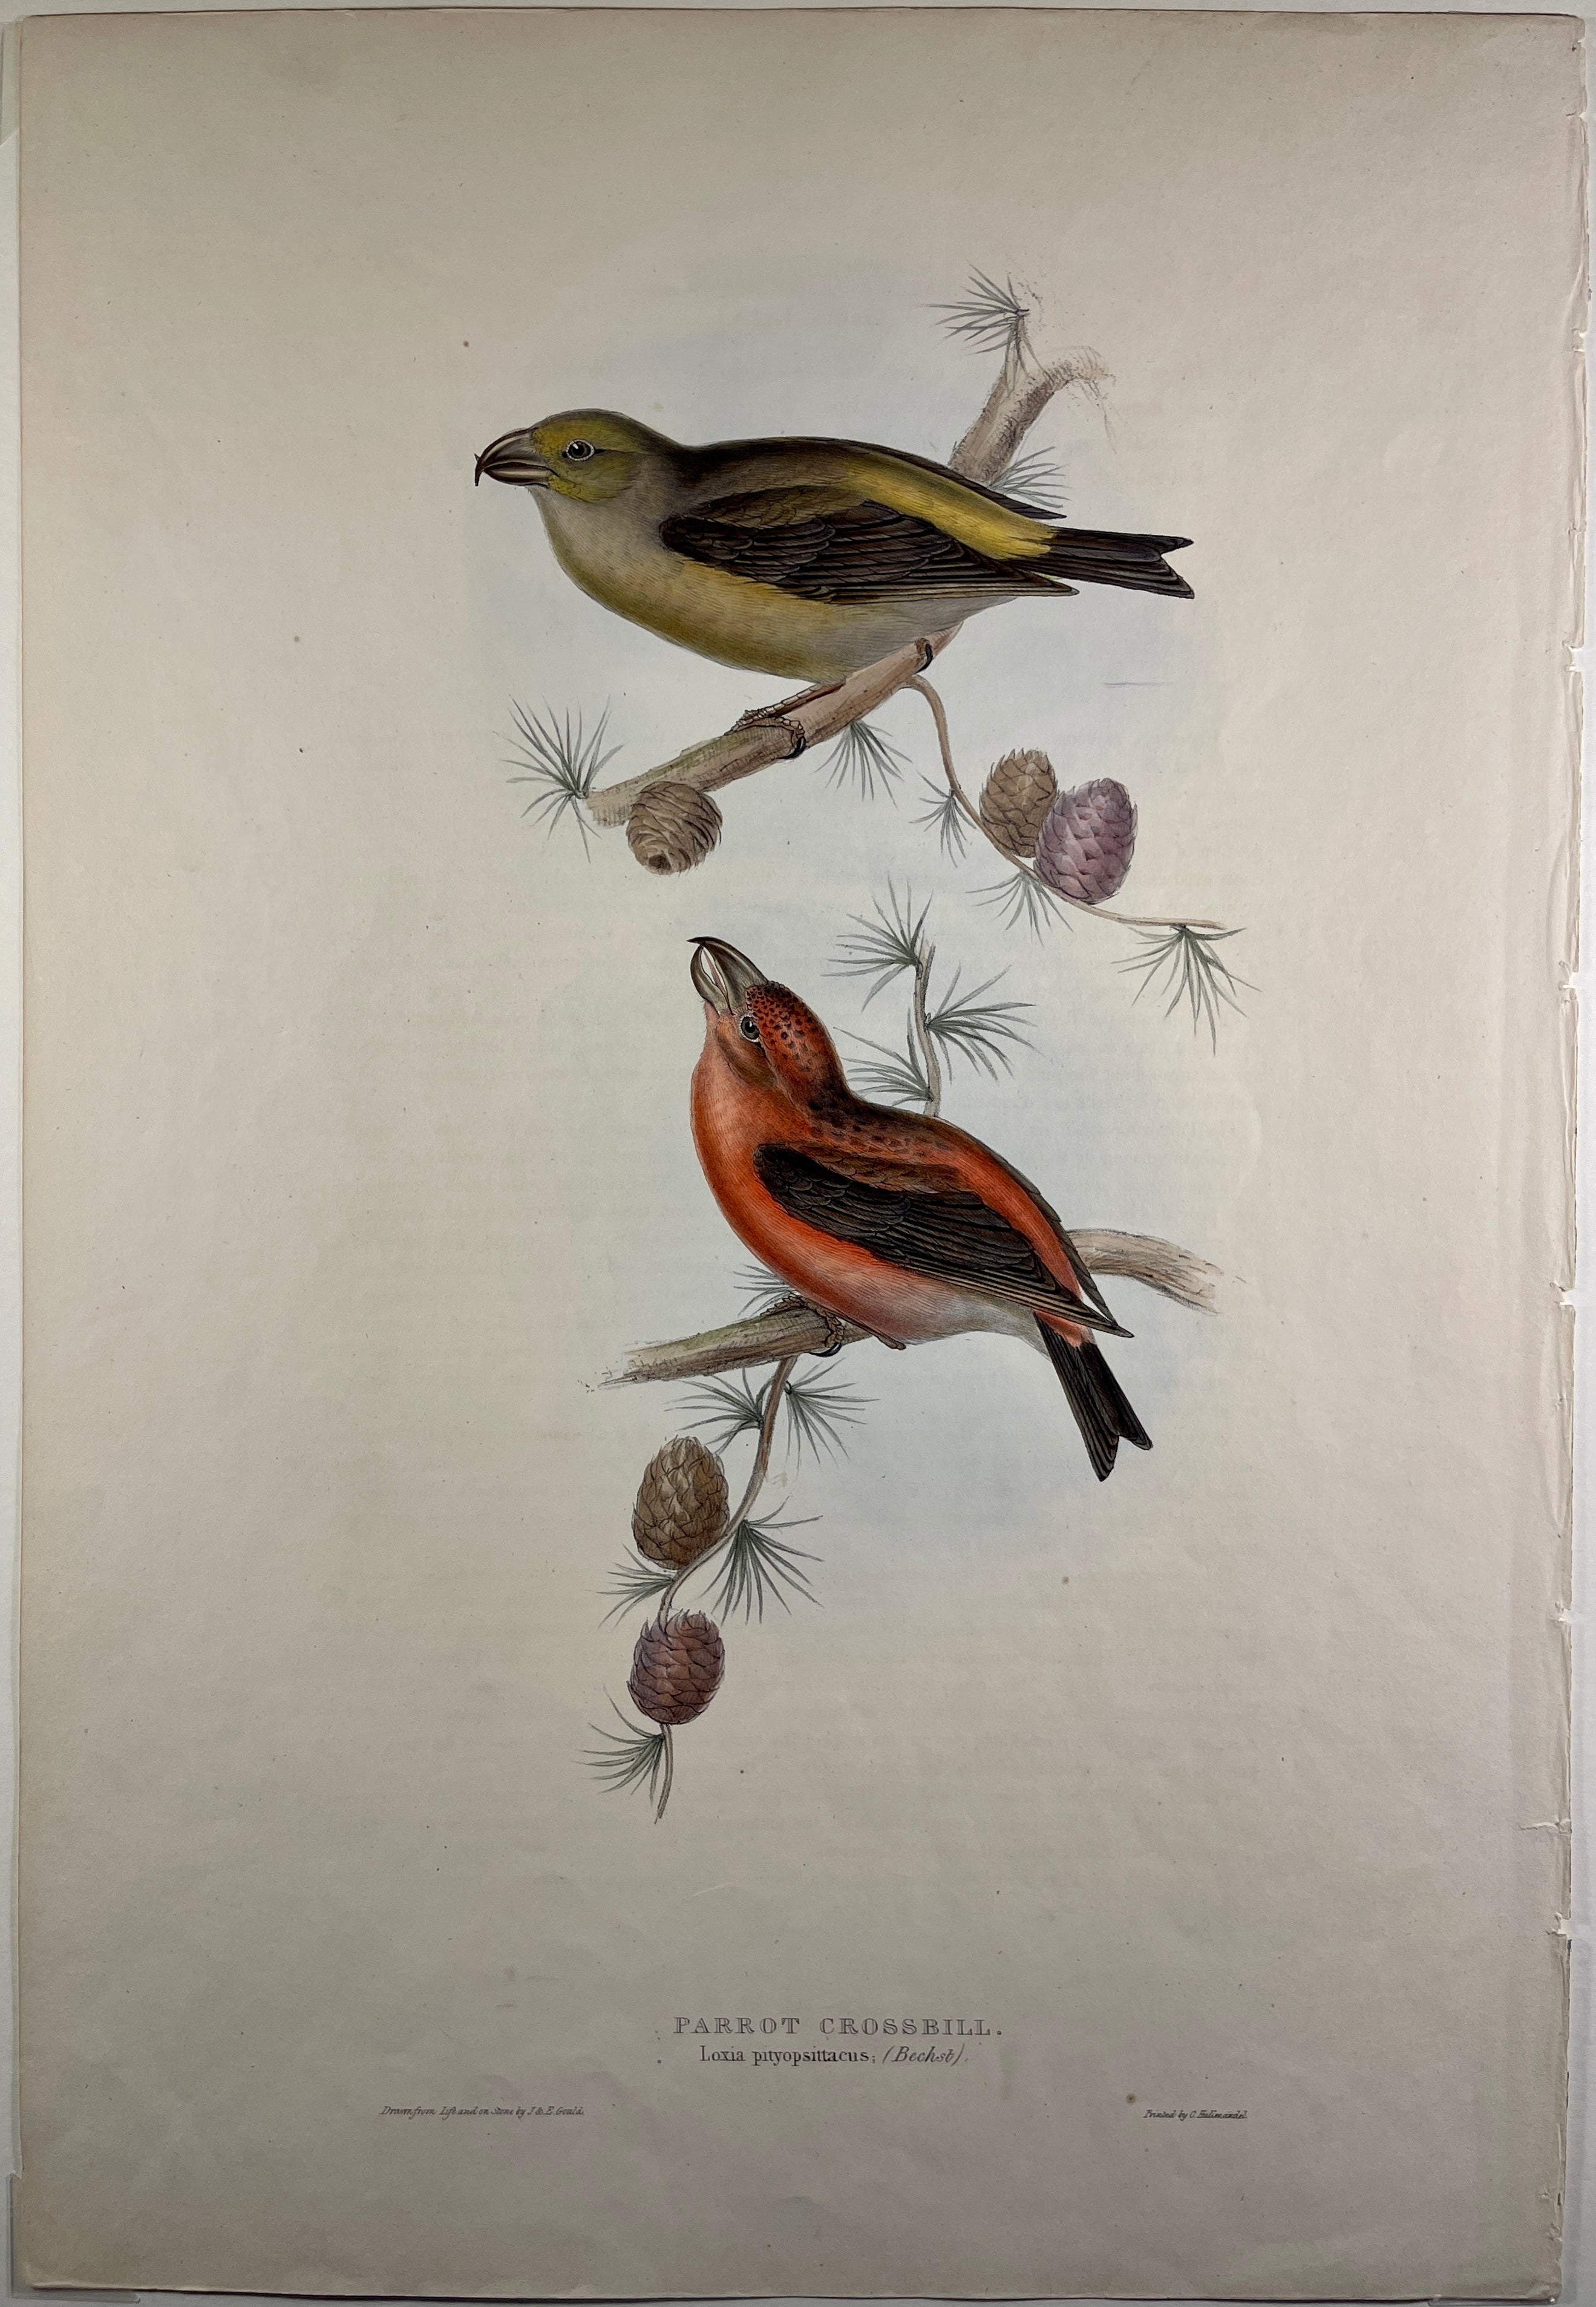 Parrot Crossbill Plate 201 - John Gould Birds Of Europe - Original Hand Colored Lithograph at Adirondack Retro